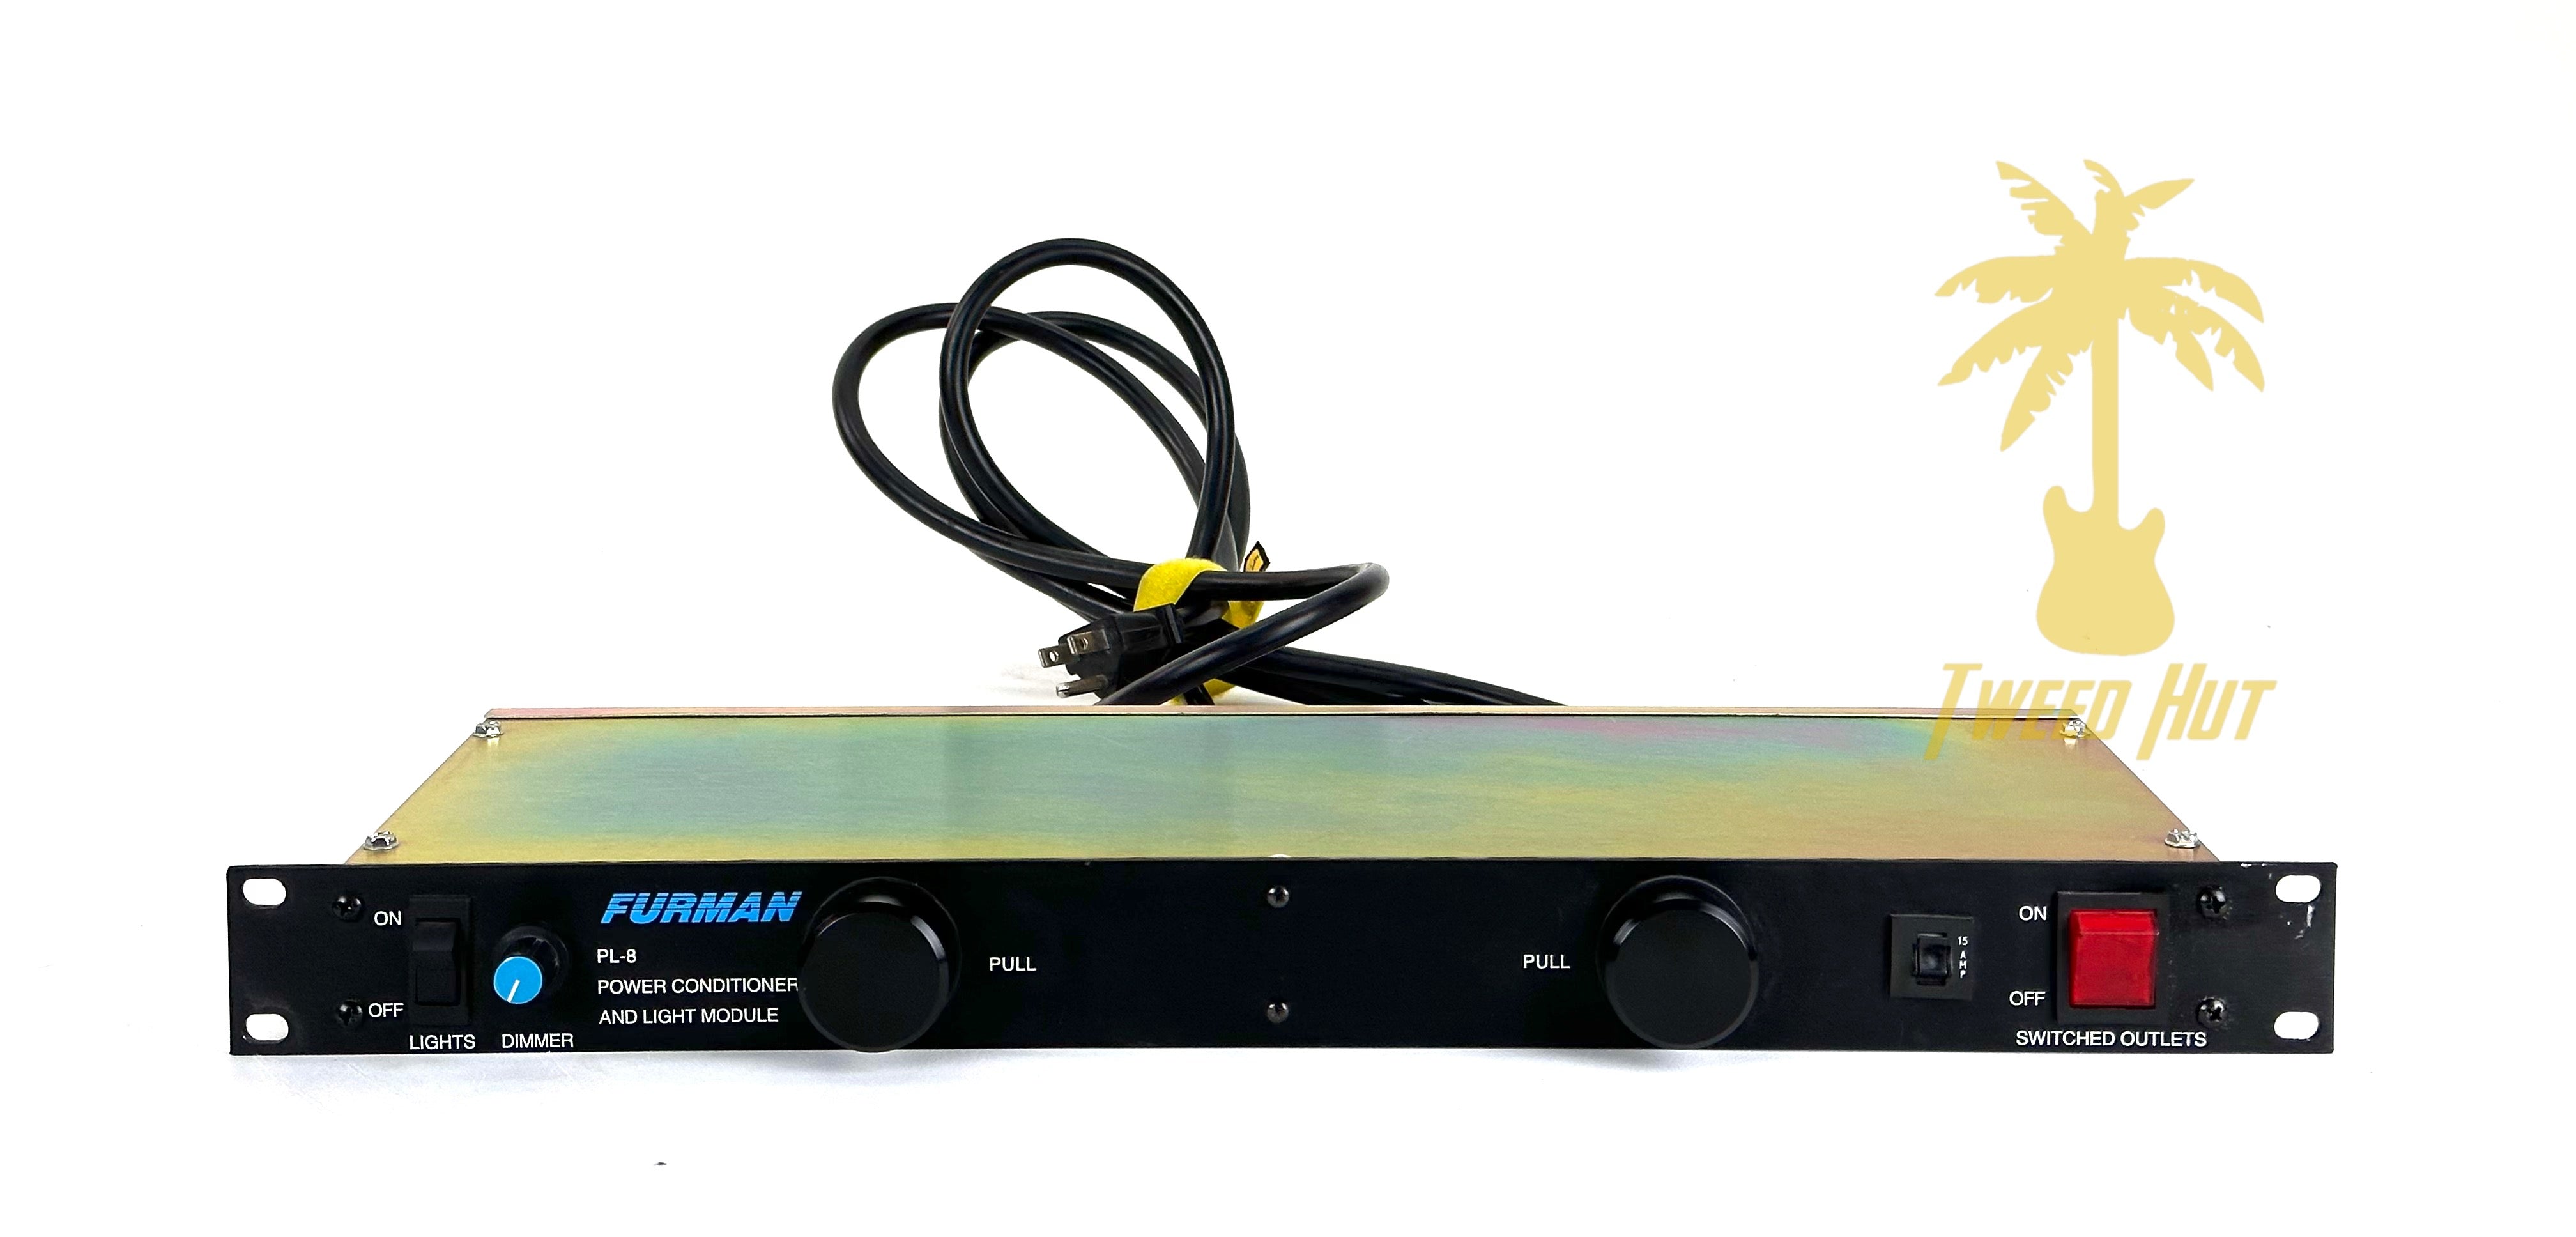 PRE-OWNED FURMAN PL-8 POWER CONDITIONER